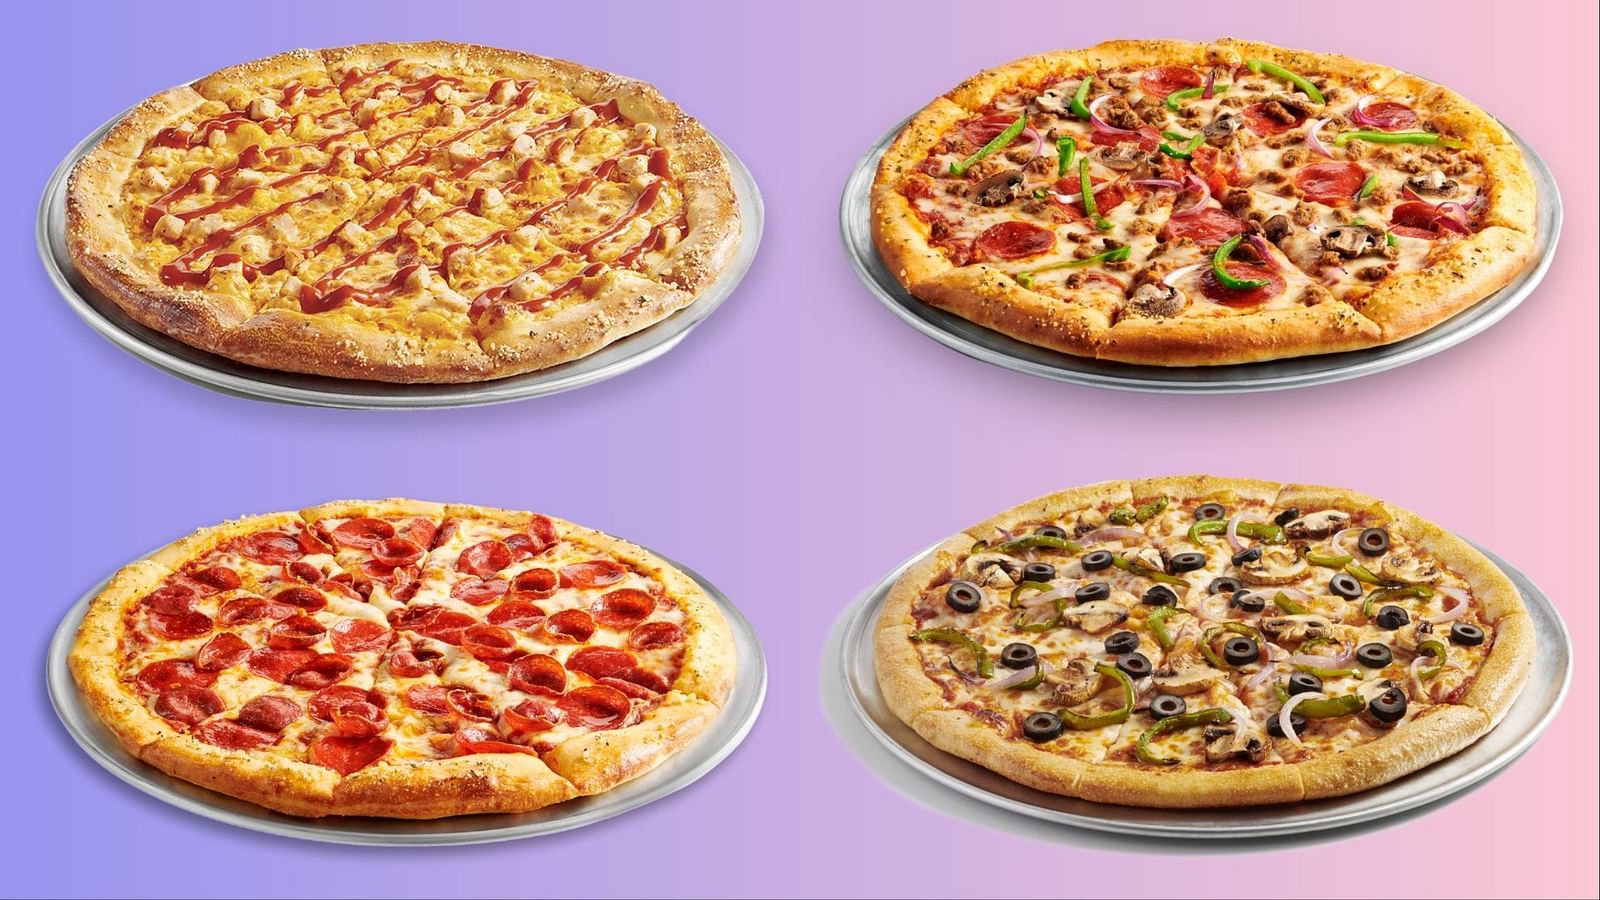 Cicis Pizza 4.99 Adult Buffet deal How to avail, availability, and